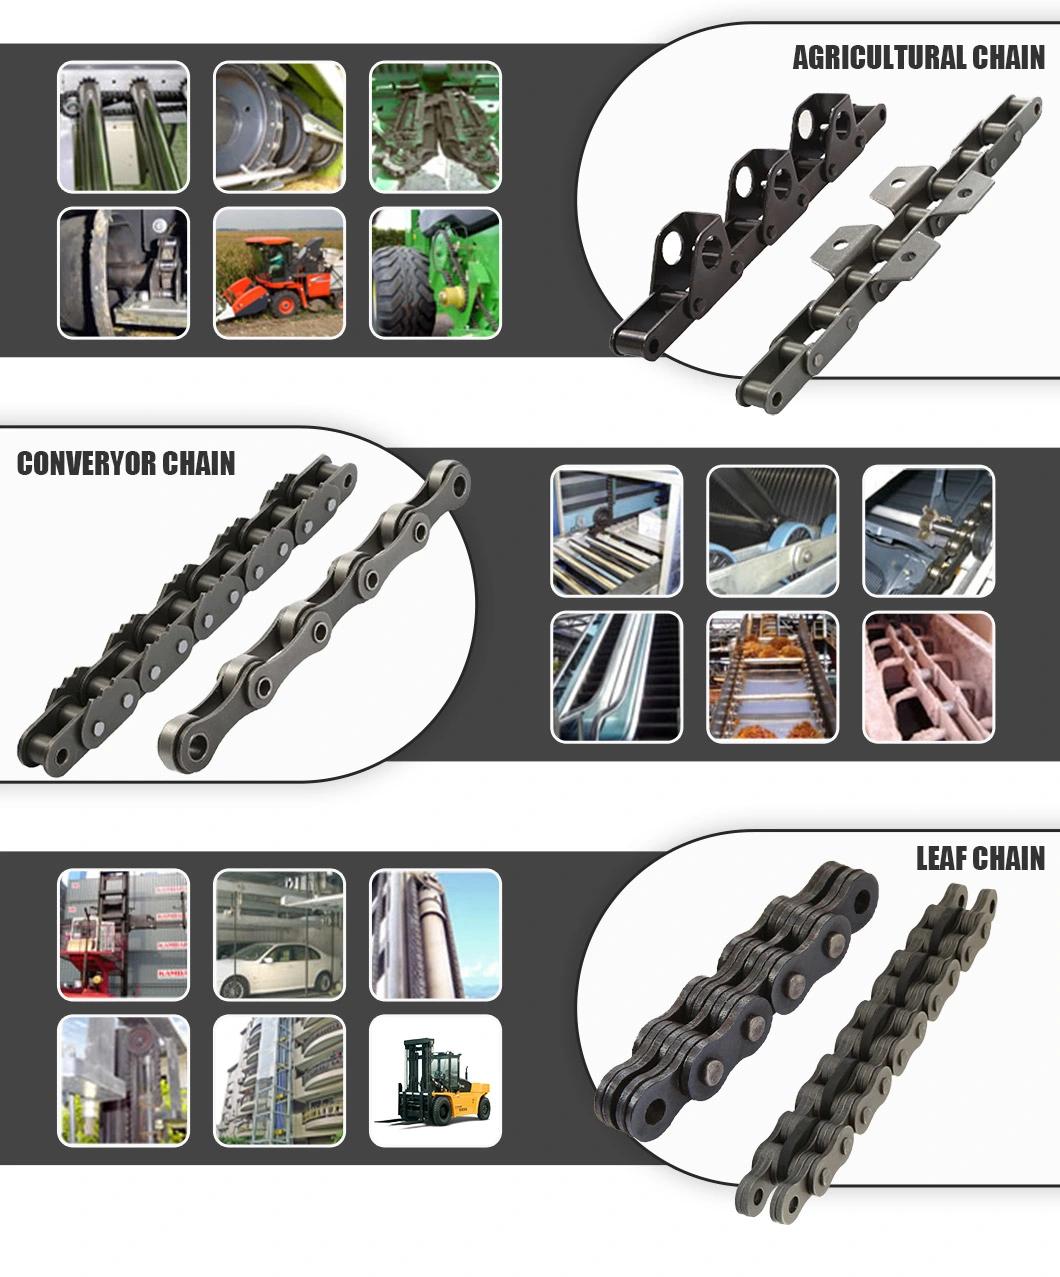 Made-to-Order ISO Standard Drop Forged Chain (998, S348)